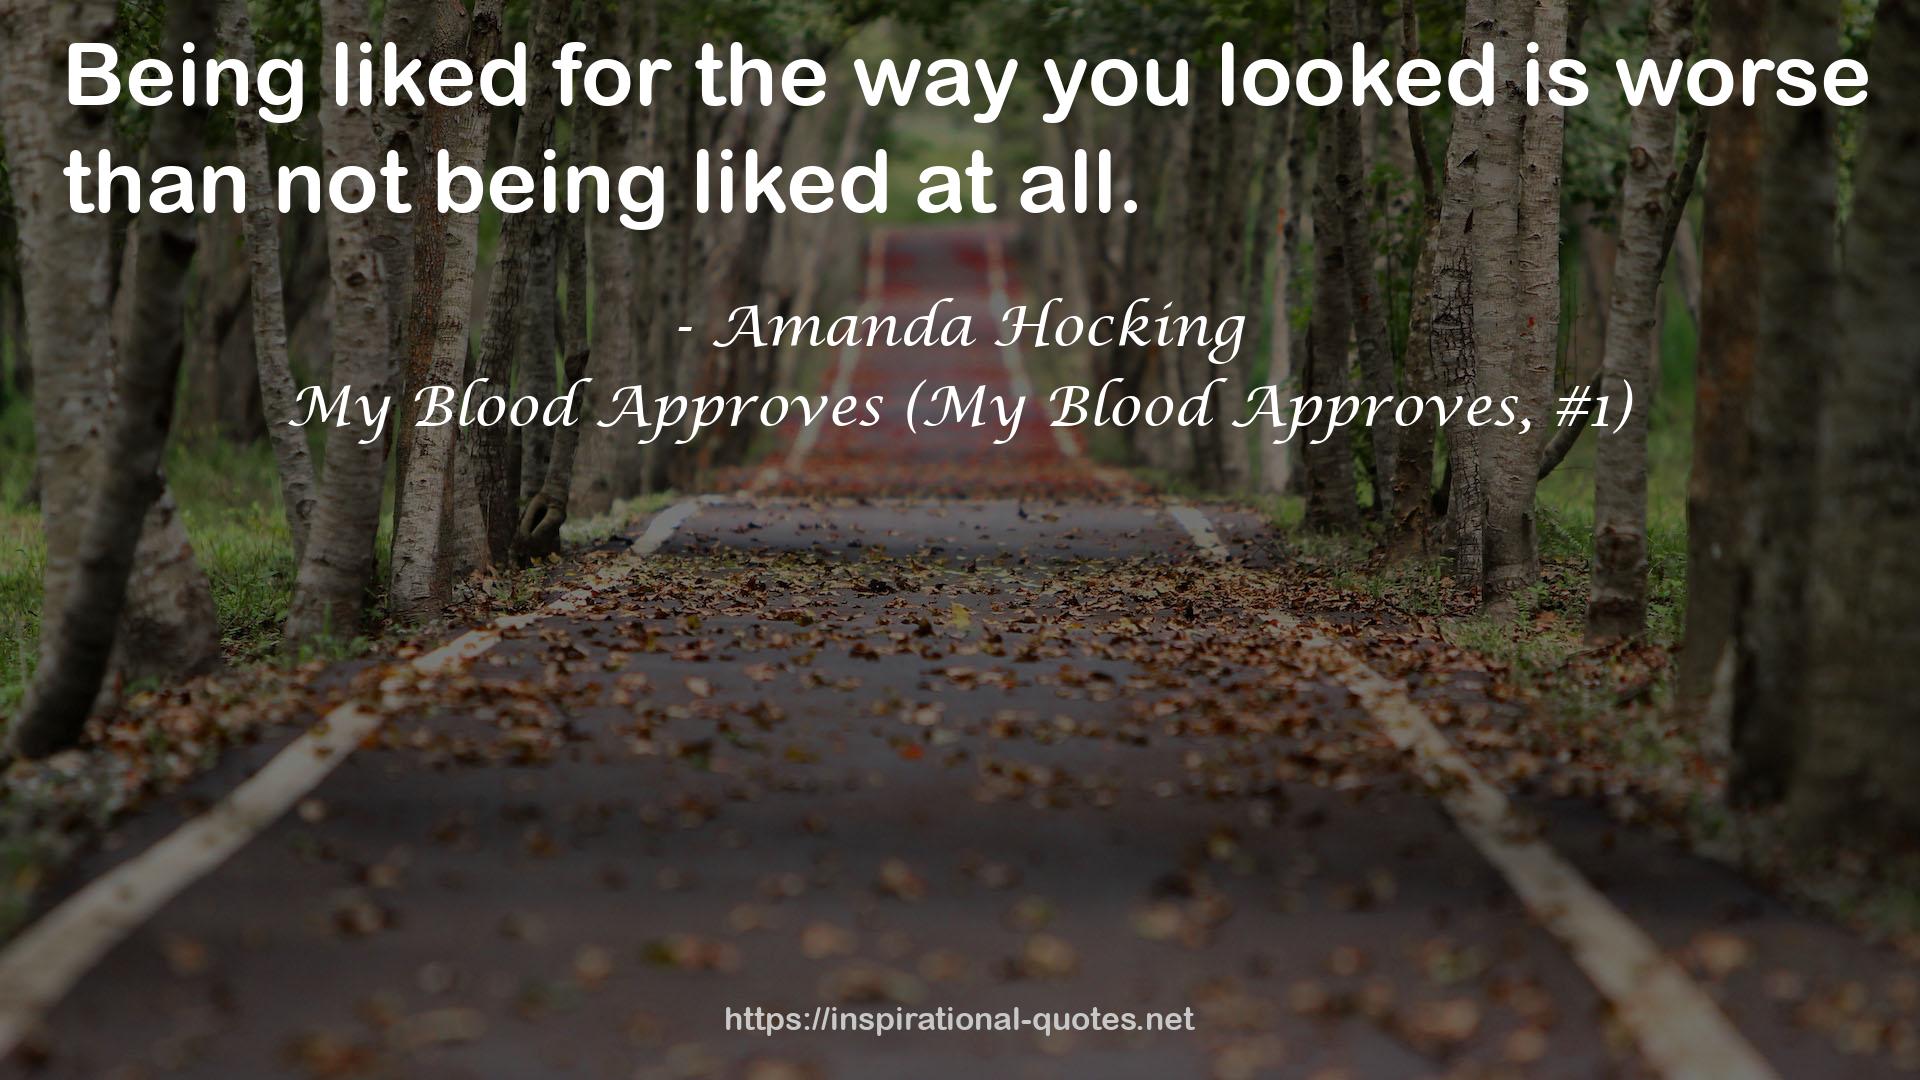 My Blood Approves (My Blood Approves, #1) QUOTES